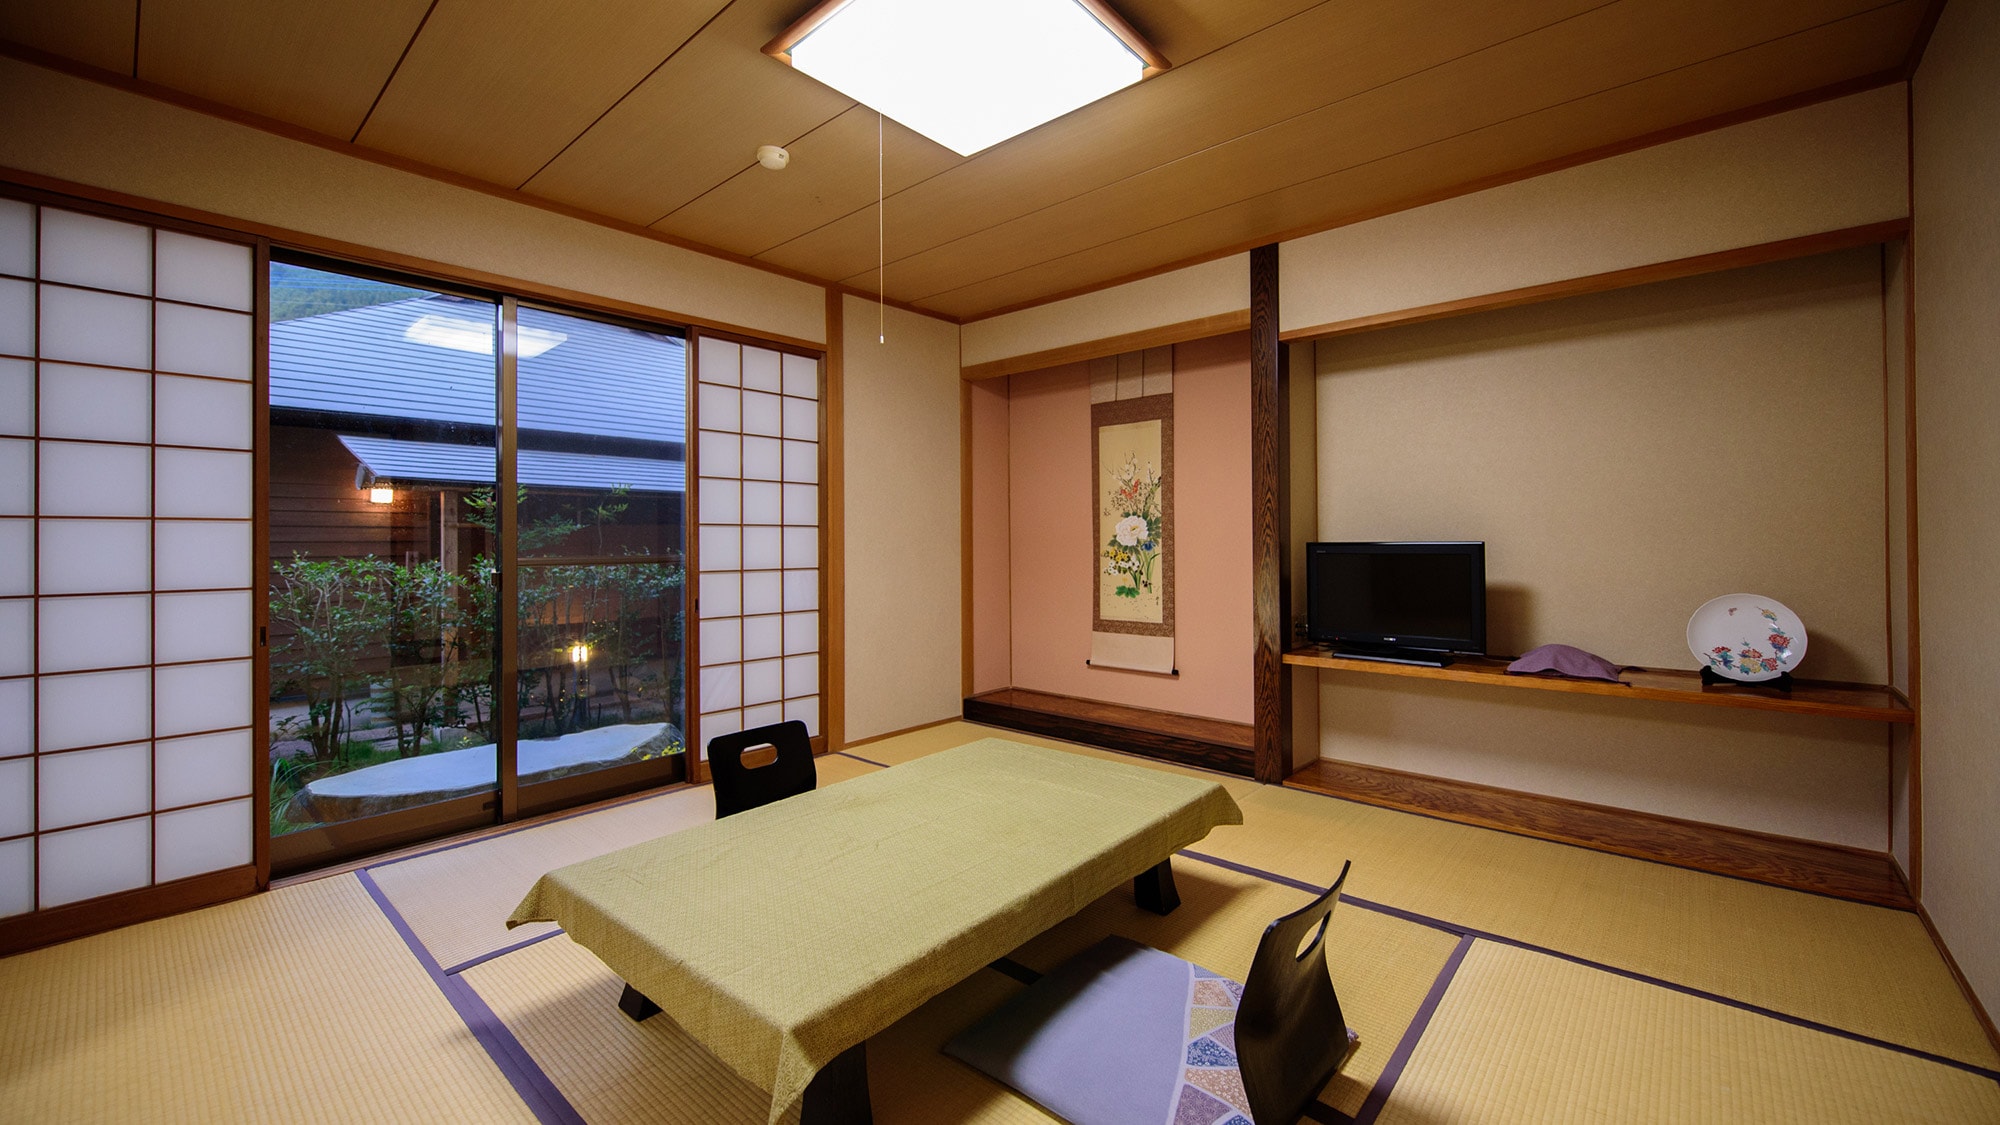 [Main building 1st floor] An example of a guest room